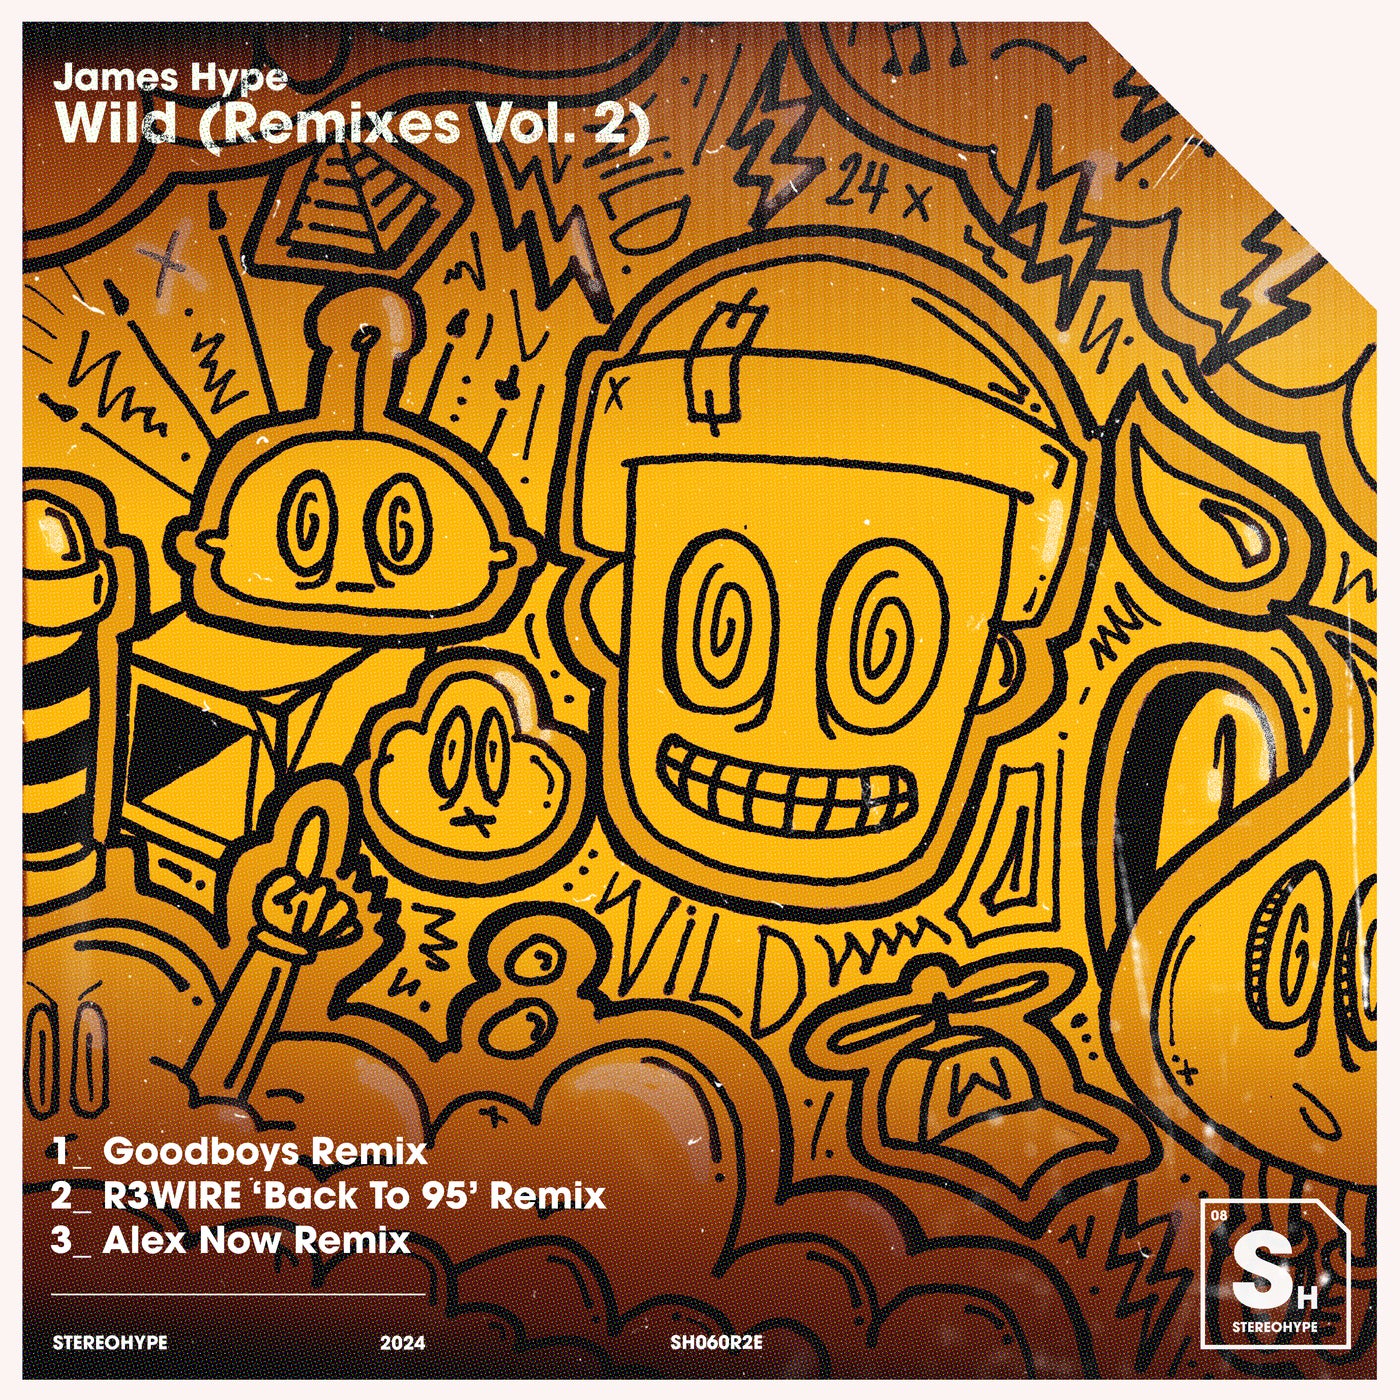 image cover: James Hype - Wild (Remixes Vol. 2) (Extended Mix) on STEREOHYPE